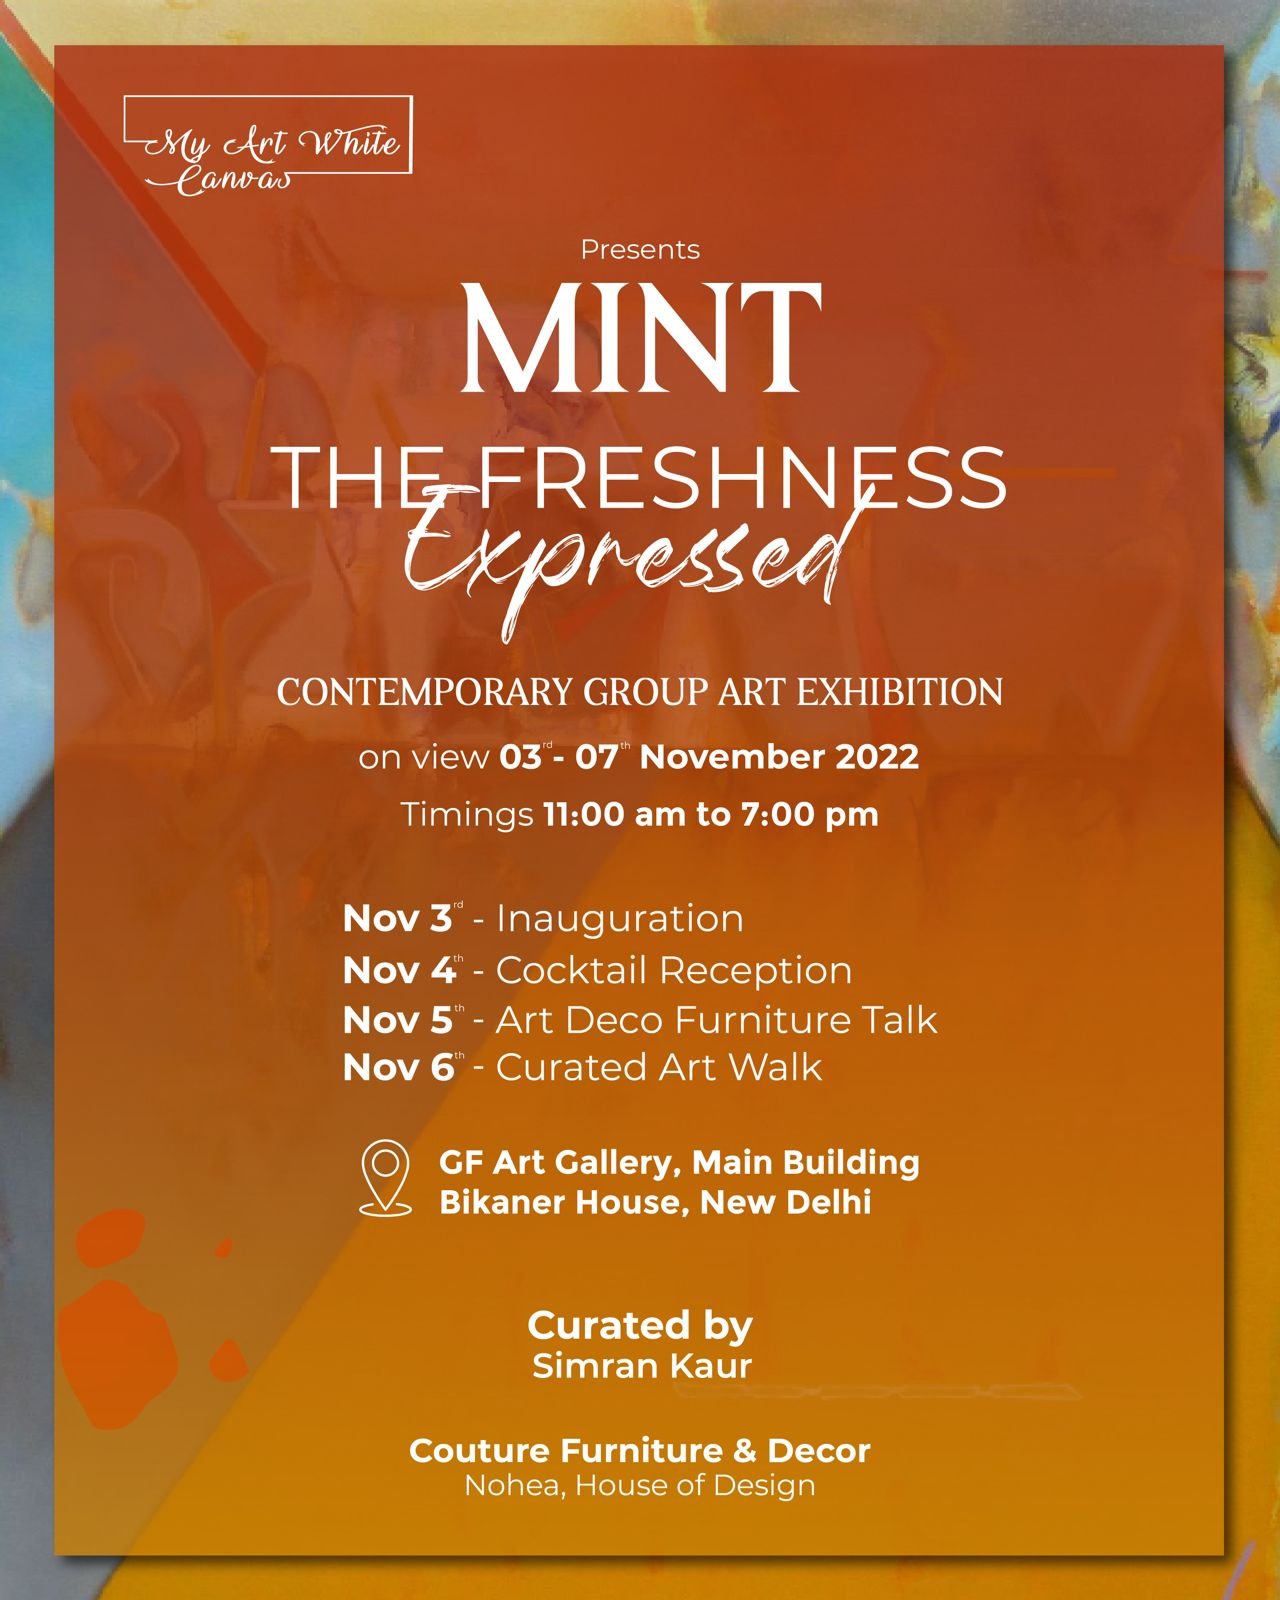 Contemporary art exhibiton Mint The Freshness Expressed